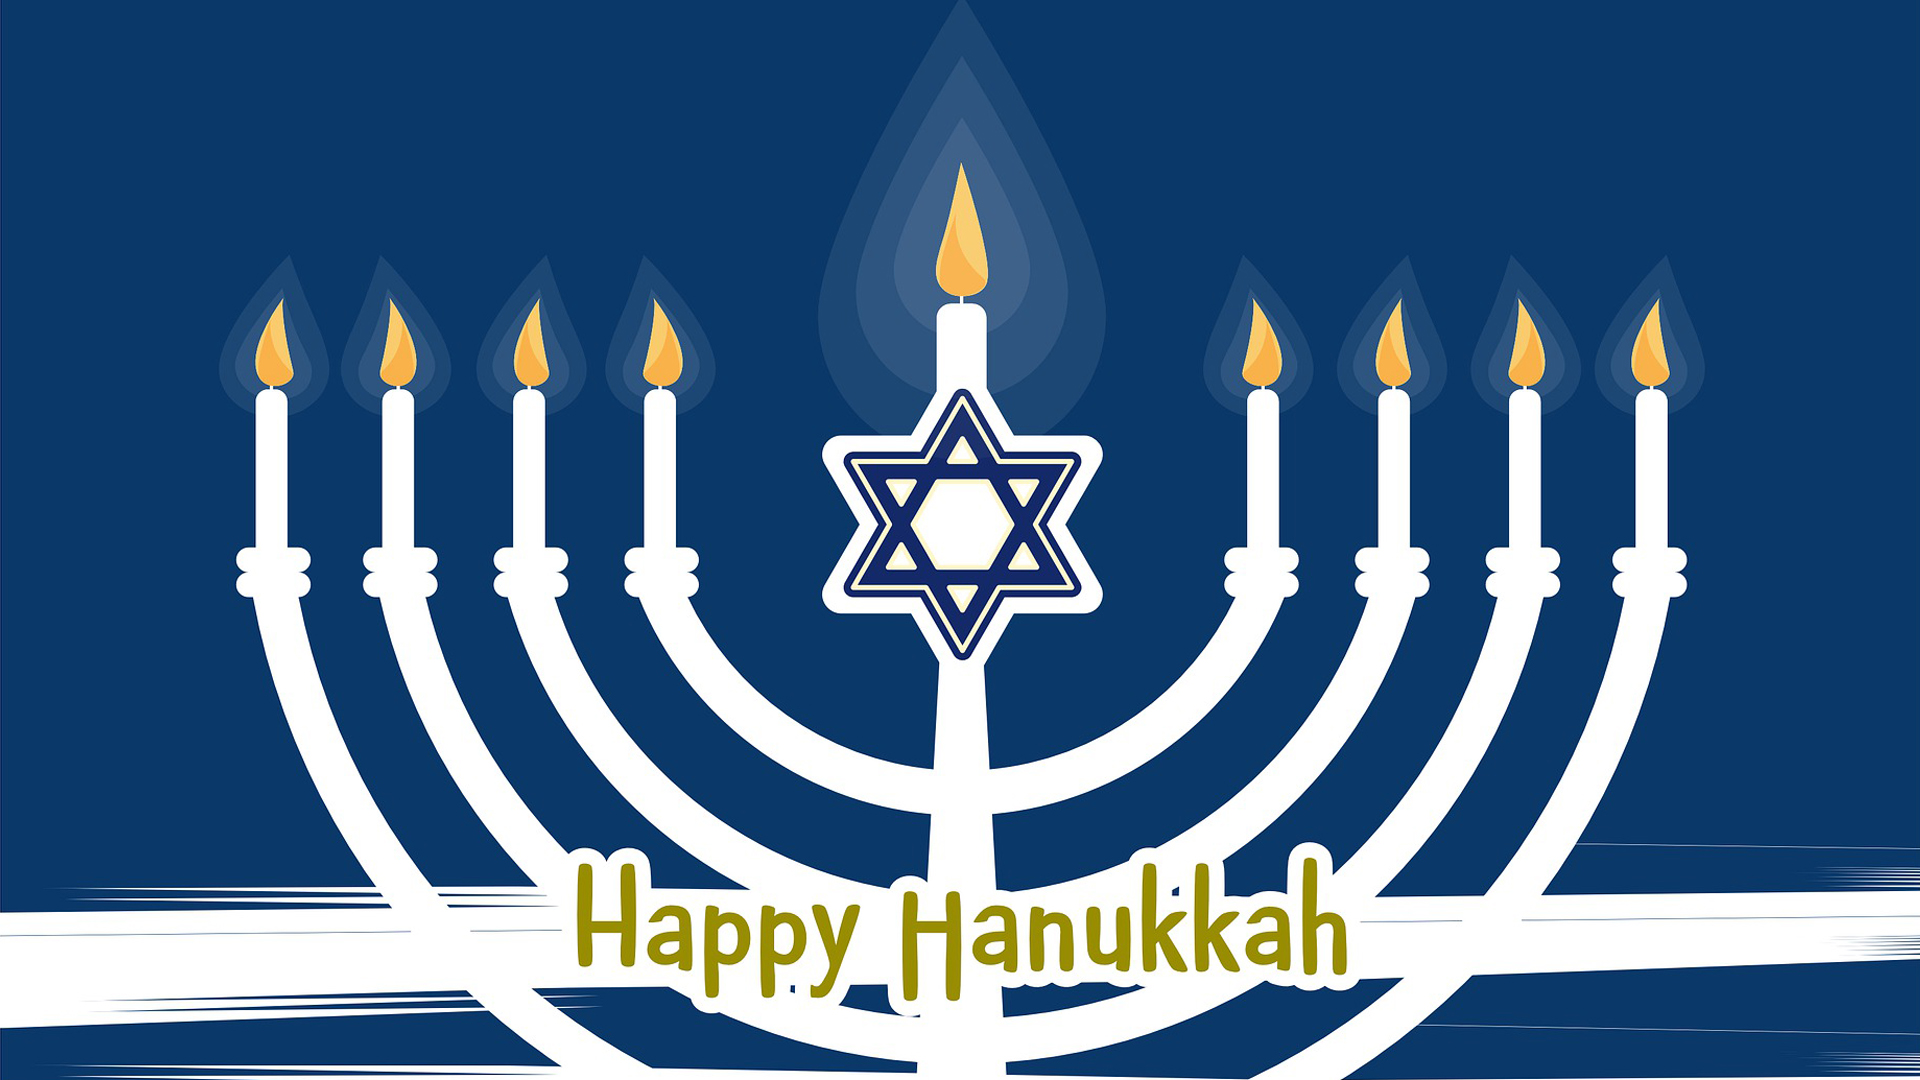 Happy Hanukkah. Navy blue background with a white menorah lit, with a Star of David in the middle.